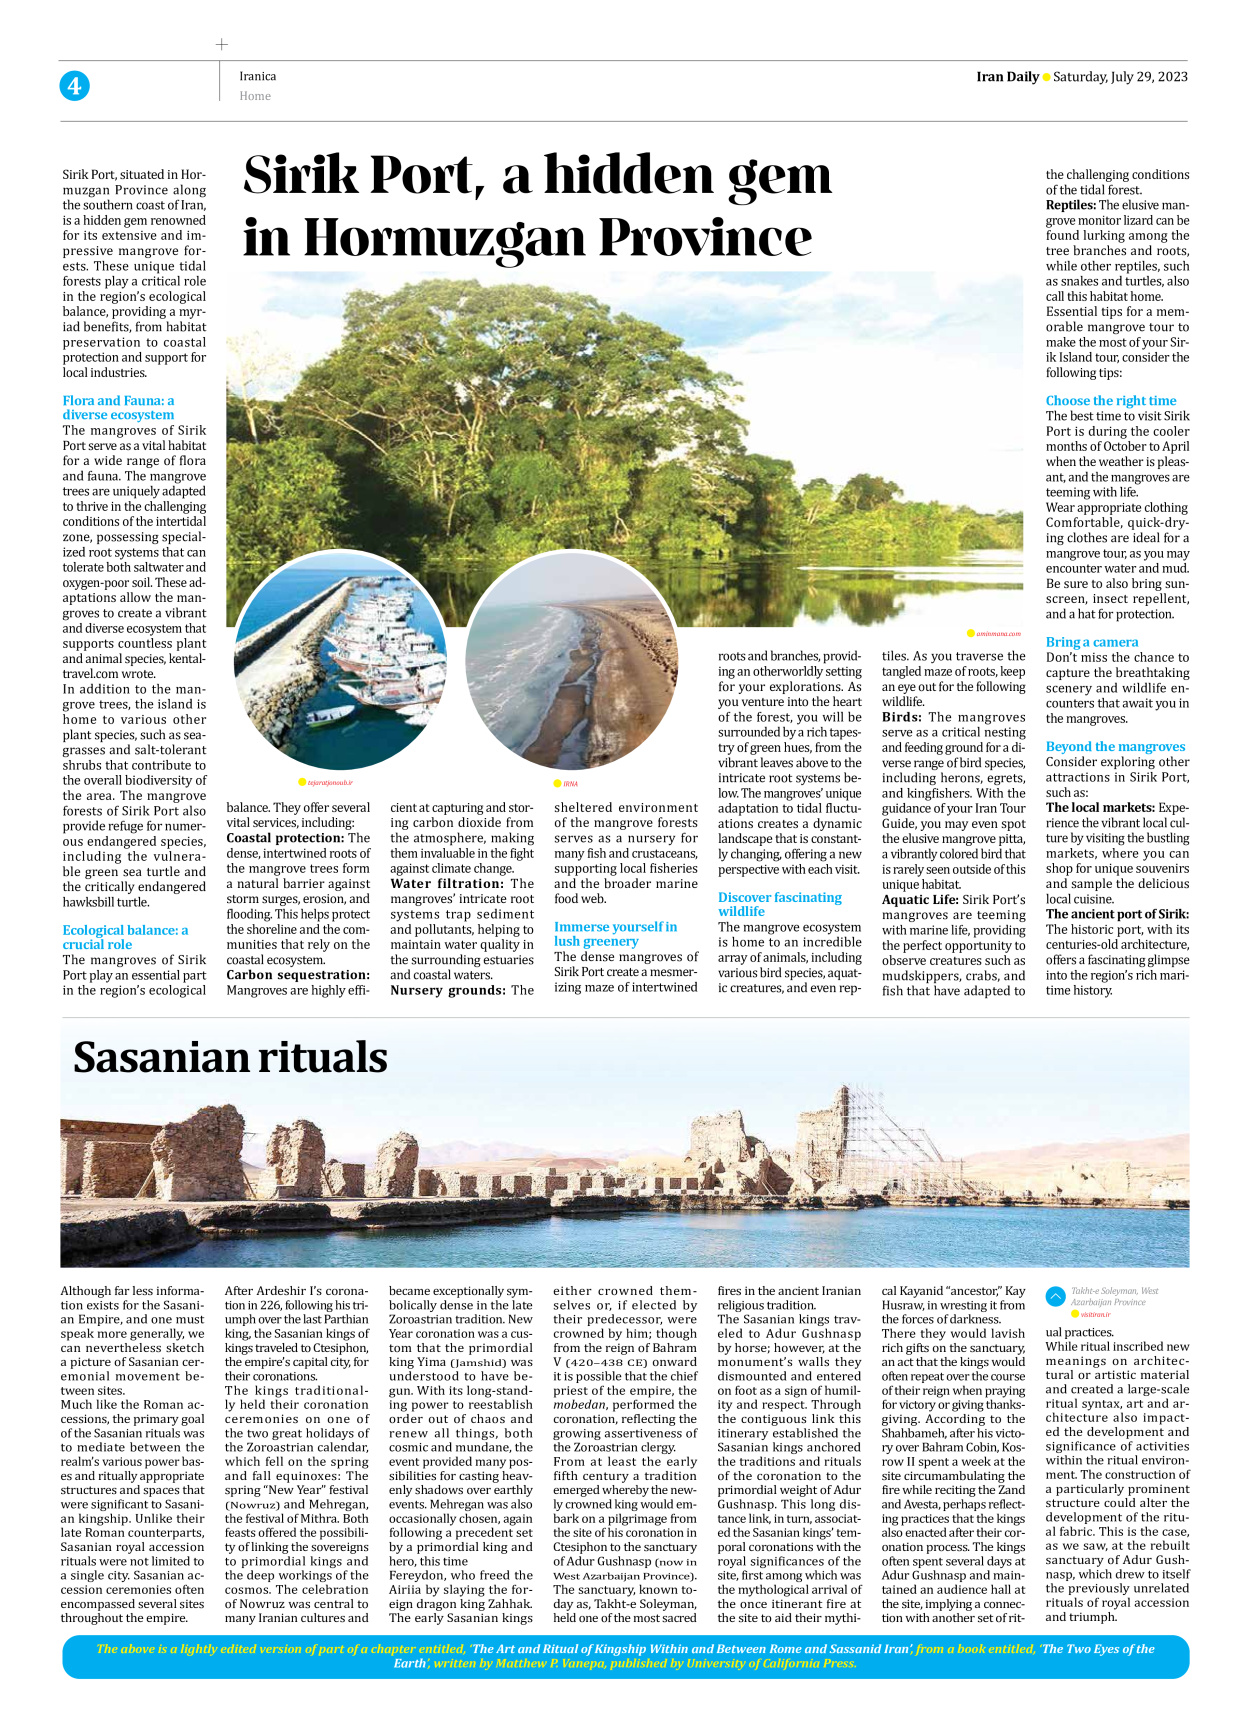 Iran Daily - Number Seven Thousand Three Hundred and Fifty - 29 July 2023 - Page 4